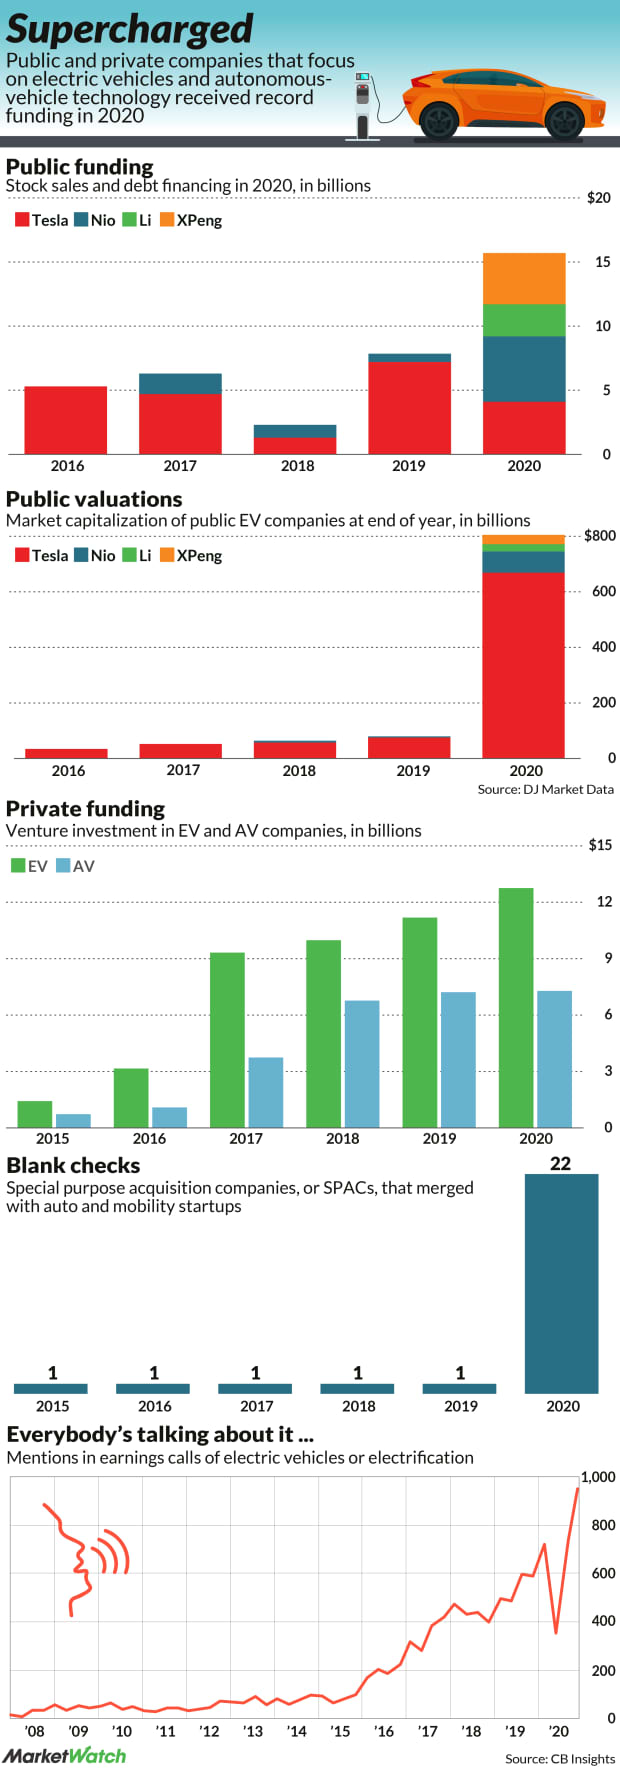 In One Chart The explosion in electricvehicle funding, valuation and